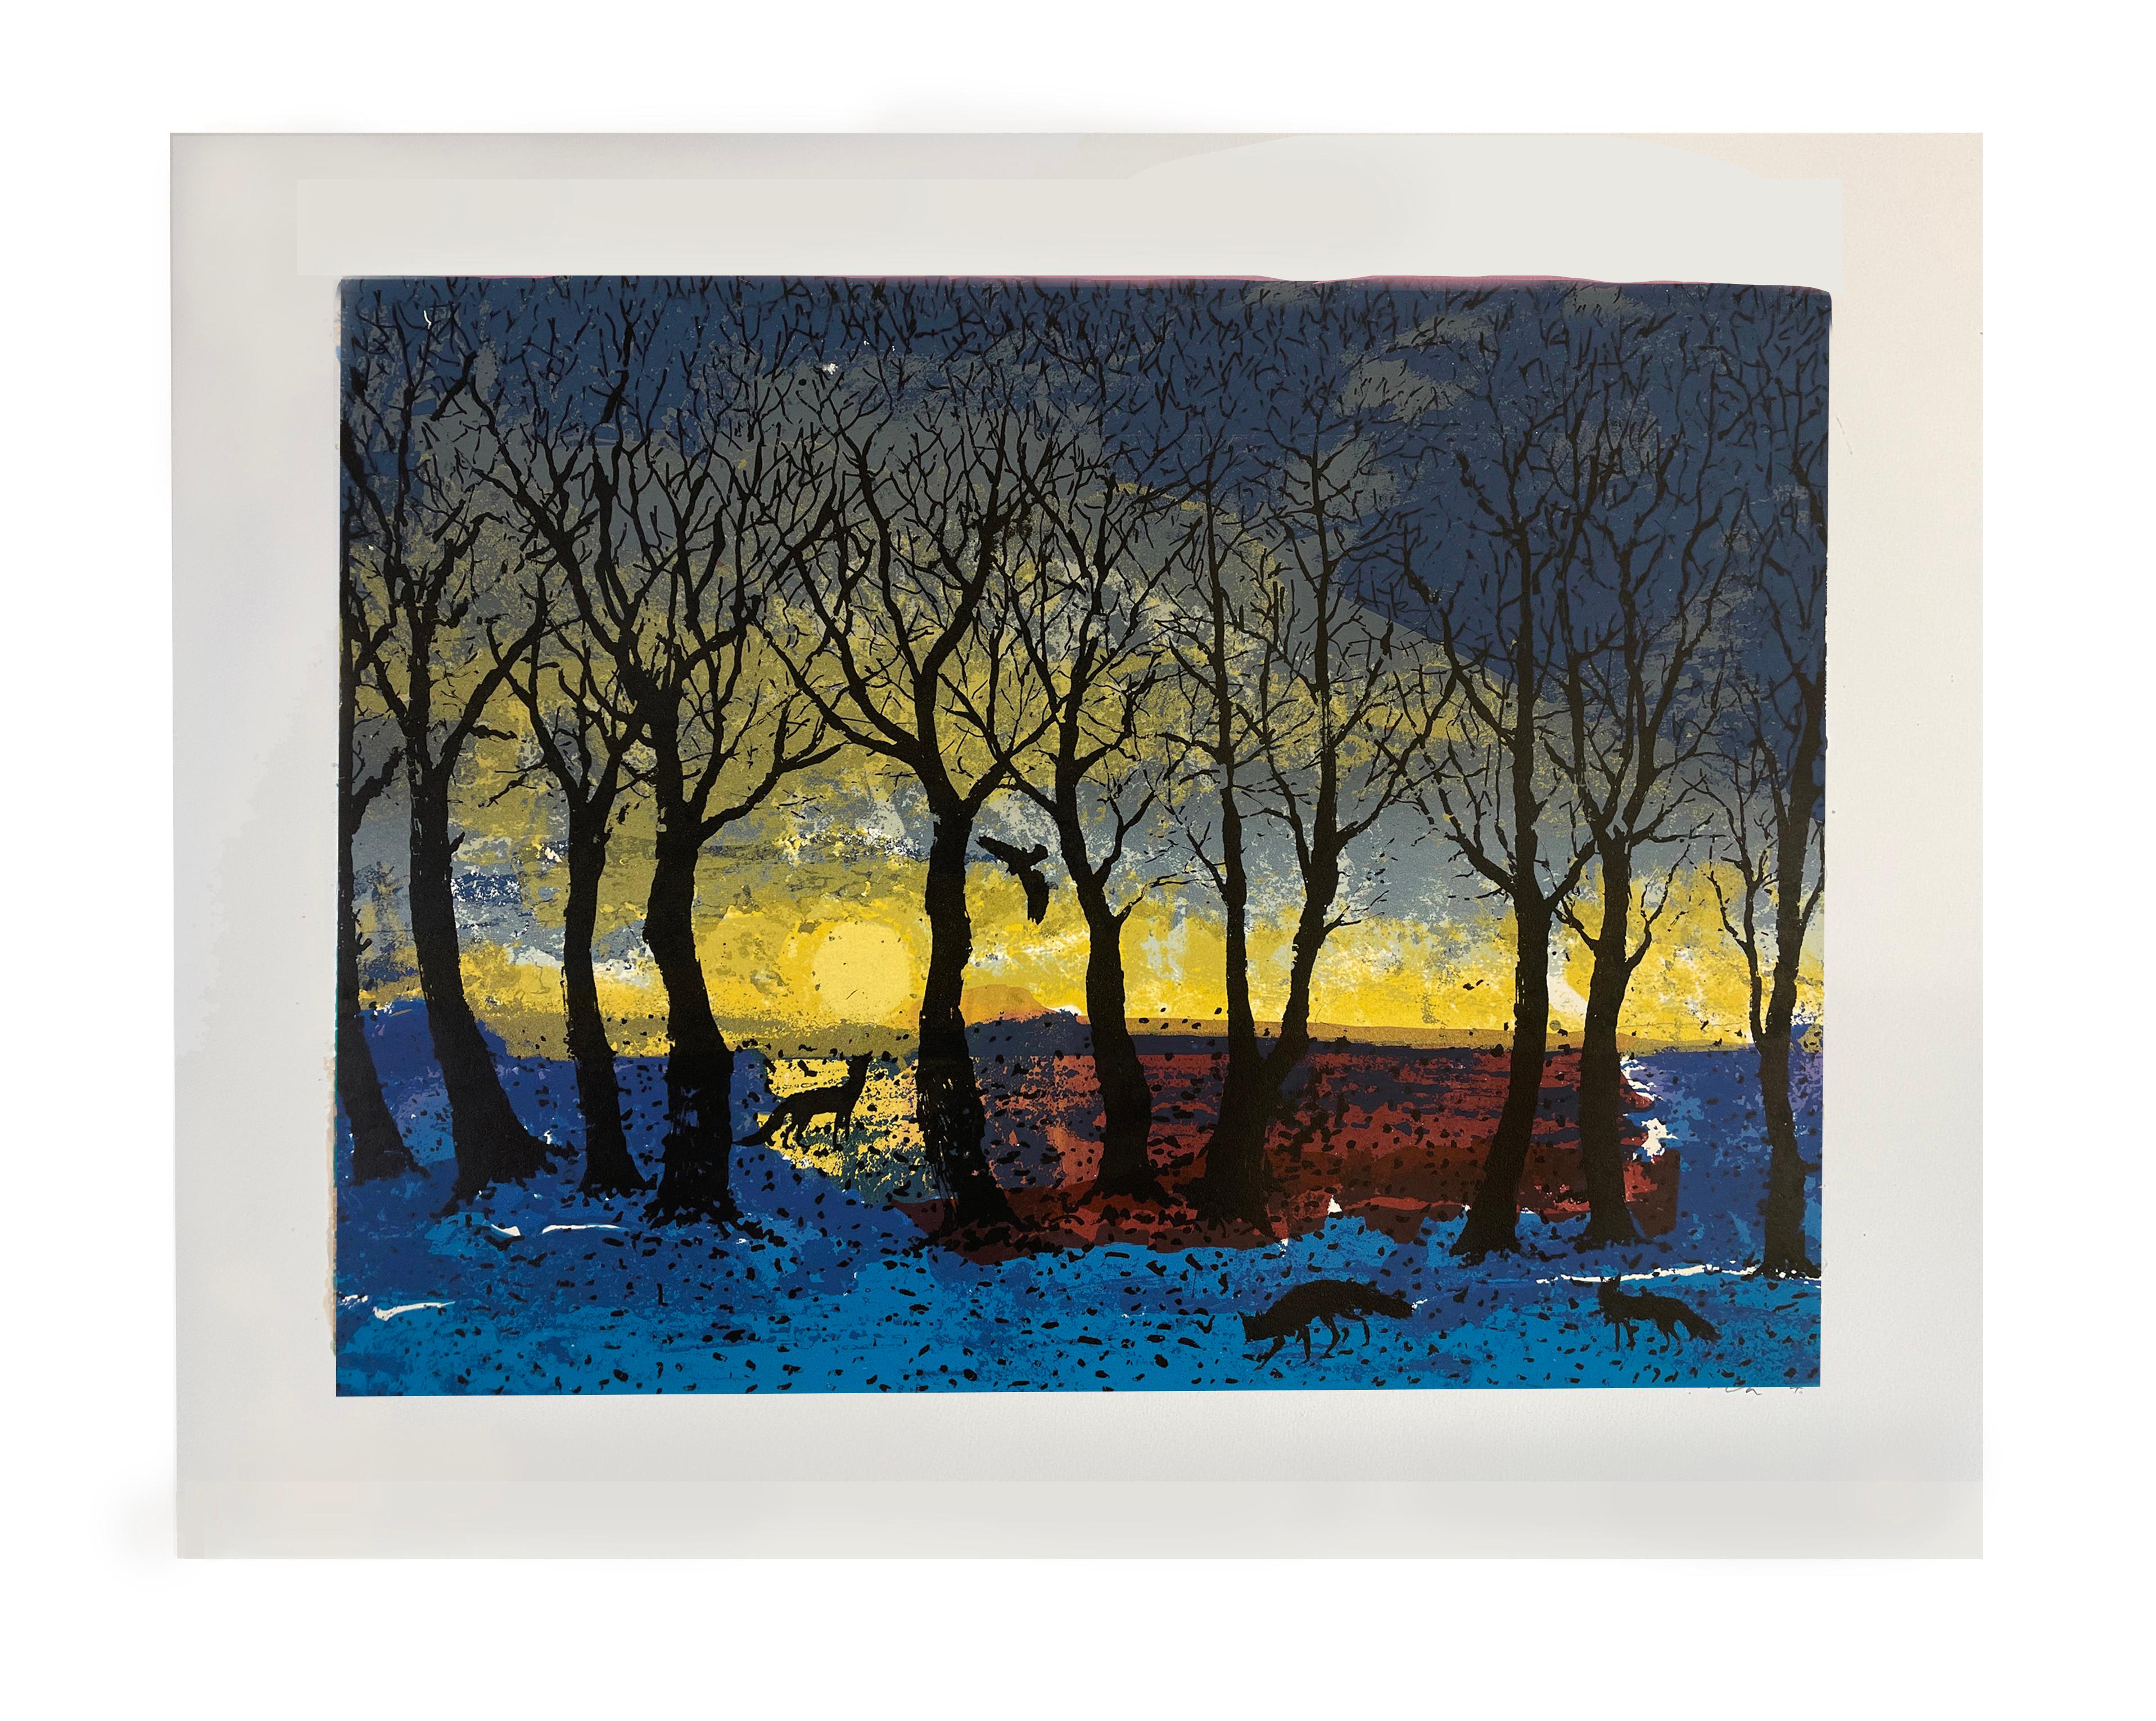 As the Hunter’s Moon rises, the darkness of the night recedes and the landscape is illuminated. Taking advantage of this bright nocturnal light, crepuscular creatures make the most of it, eagerly searching for food.

This 8 colour silkscreen is